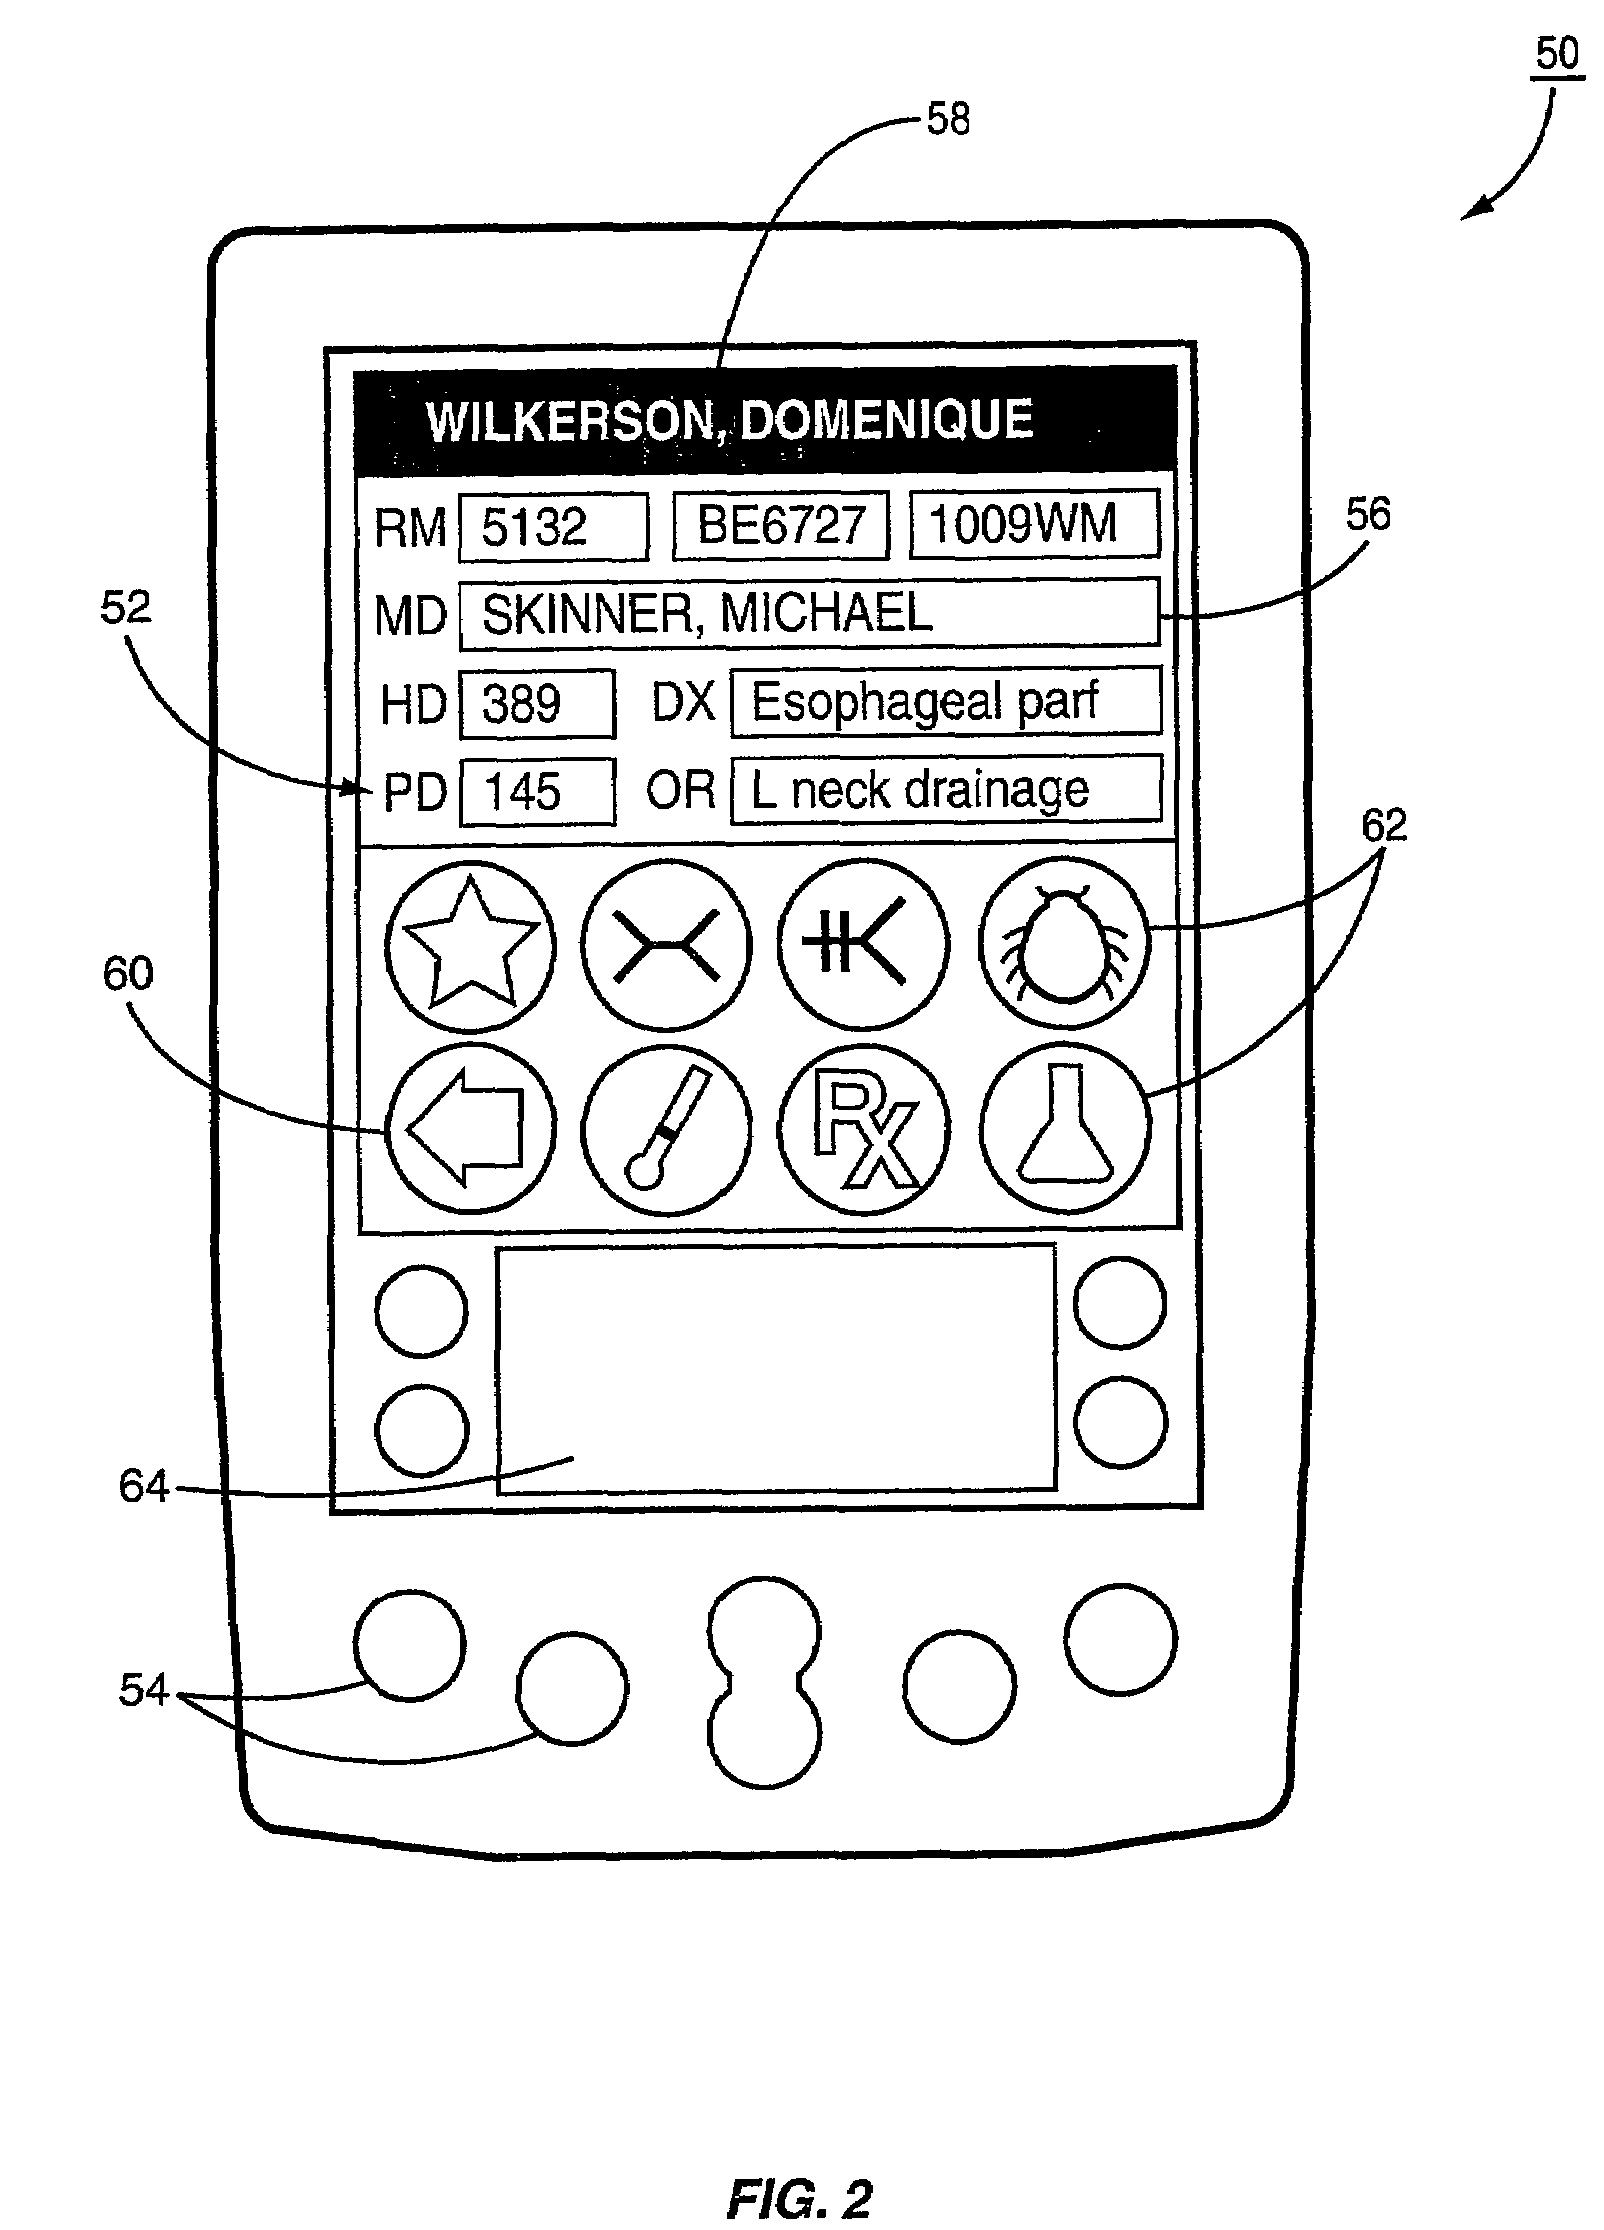 Method and system for extracting medical information for presentation to medical providers on mobile terminals